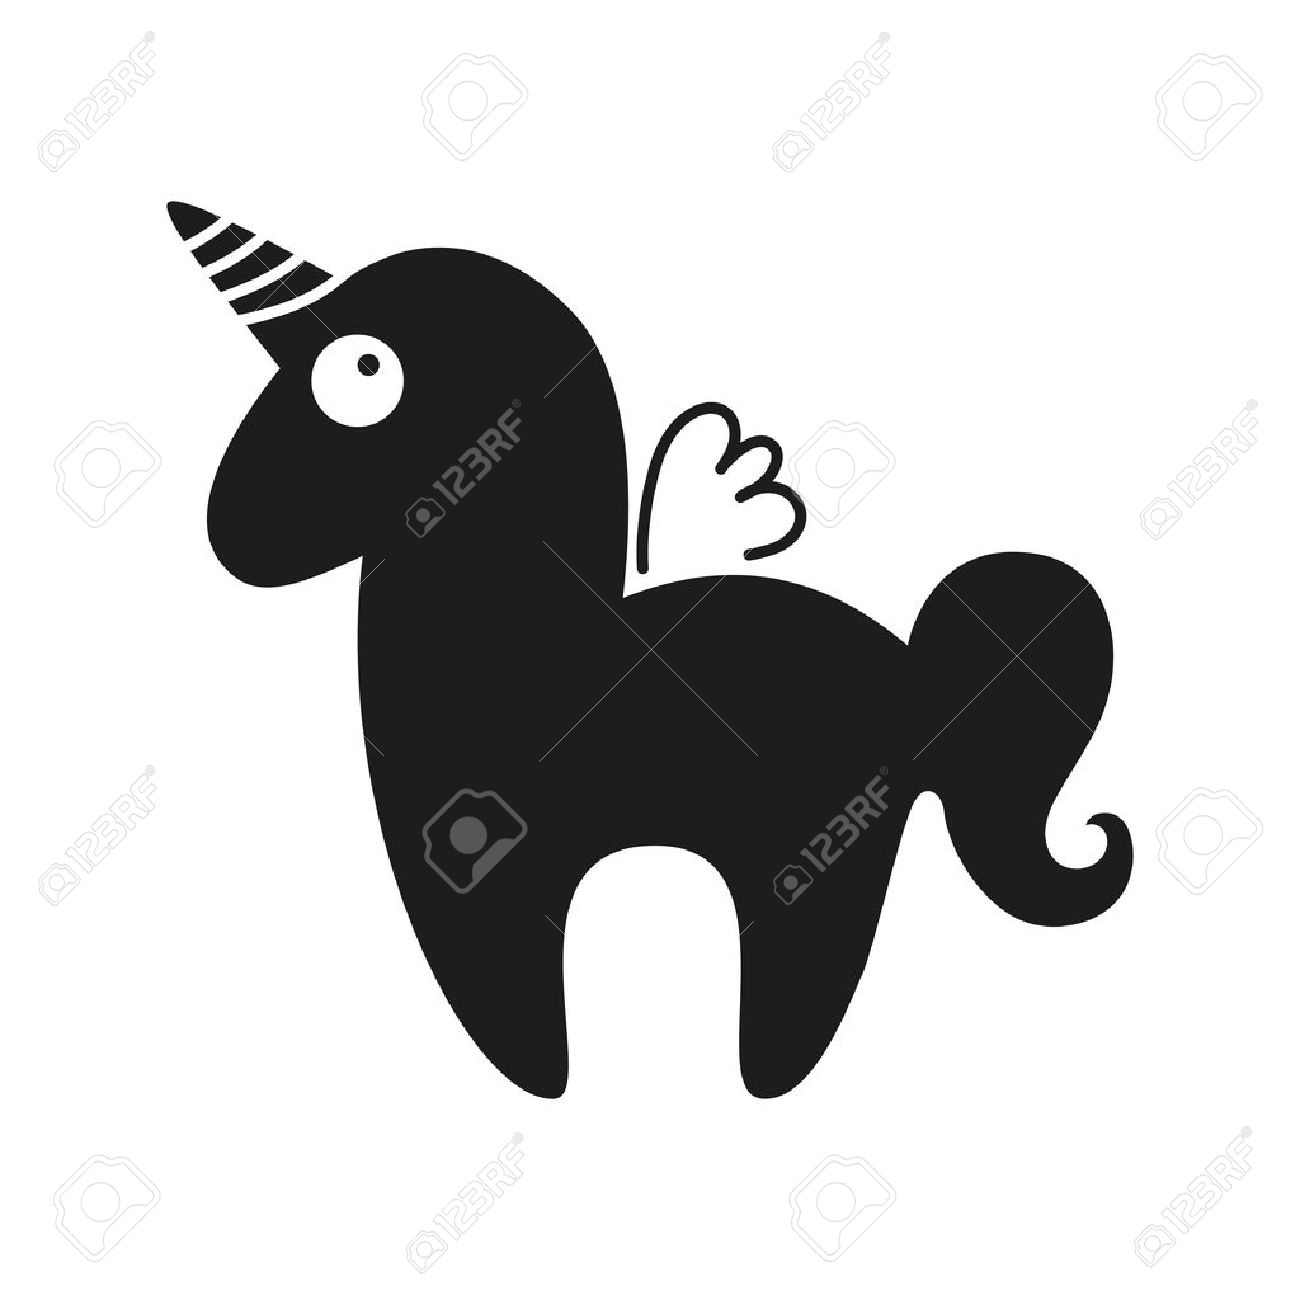 Unicorn. Magic horse with horn and wings. Unicorn silhouette on background.  Vector illustration